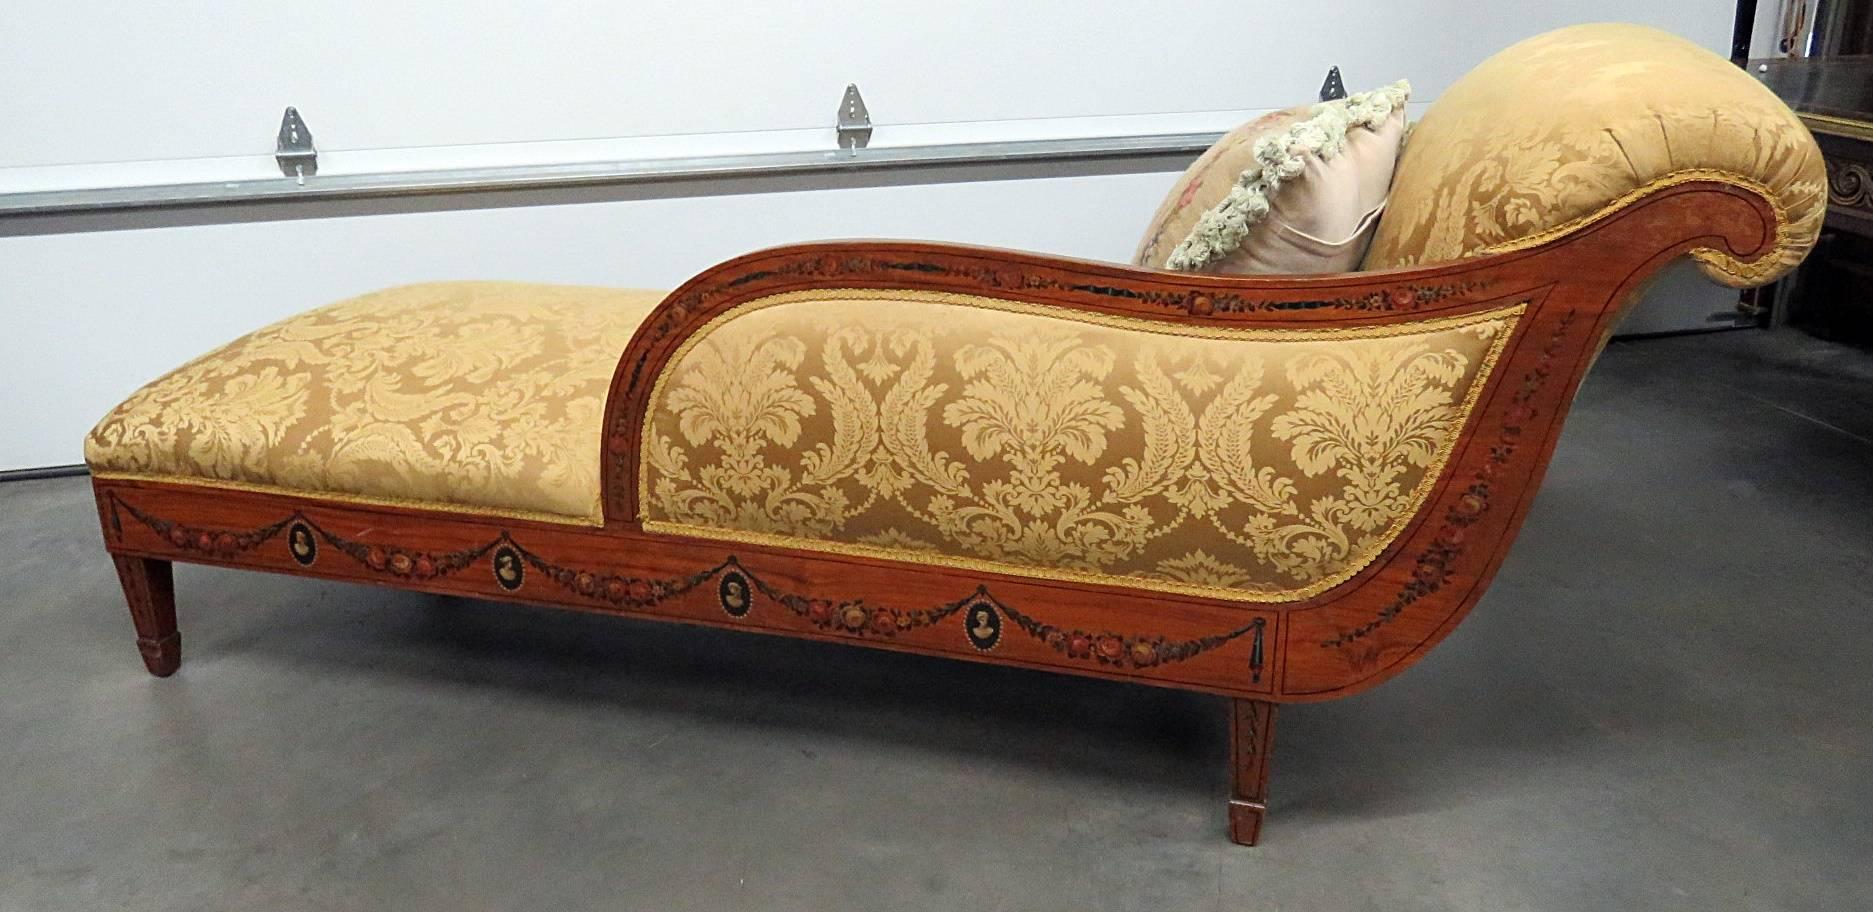 20th Century Early English 1850s Era Satinwood Adams Painted Chaise Longue Recamier Daybed